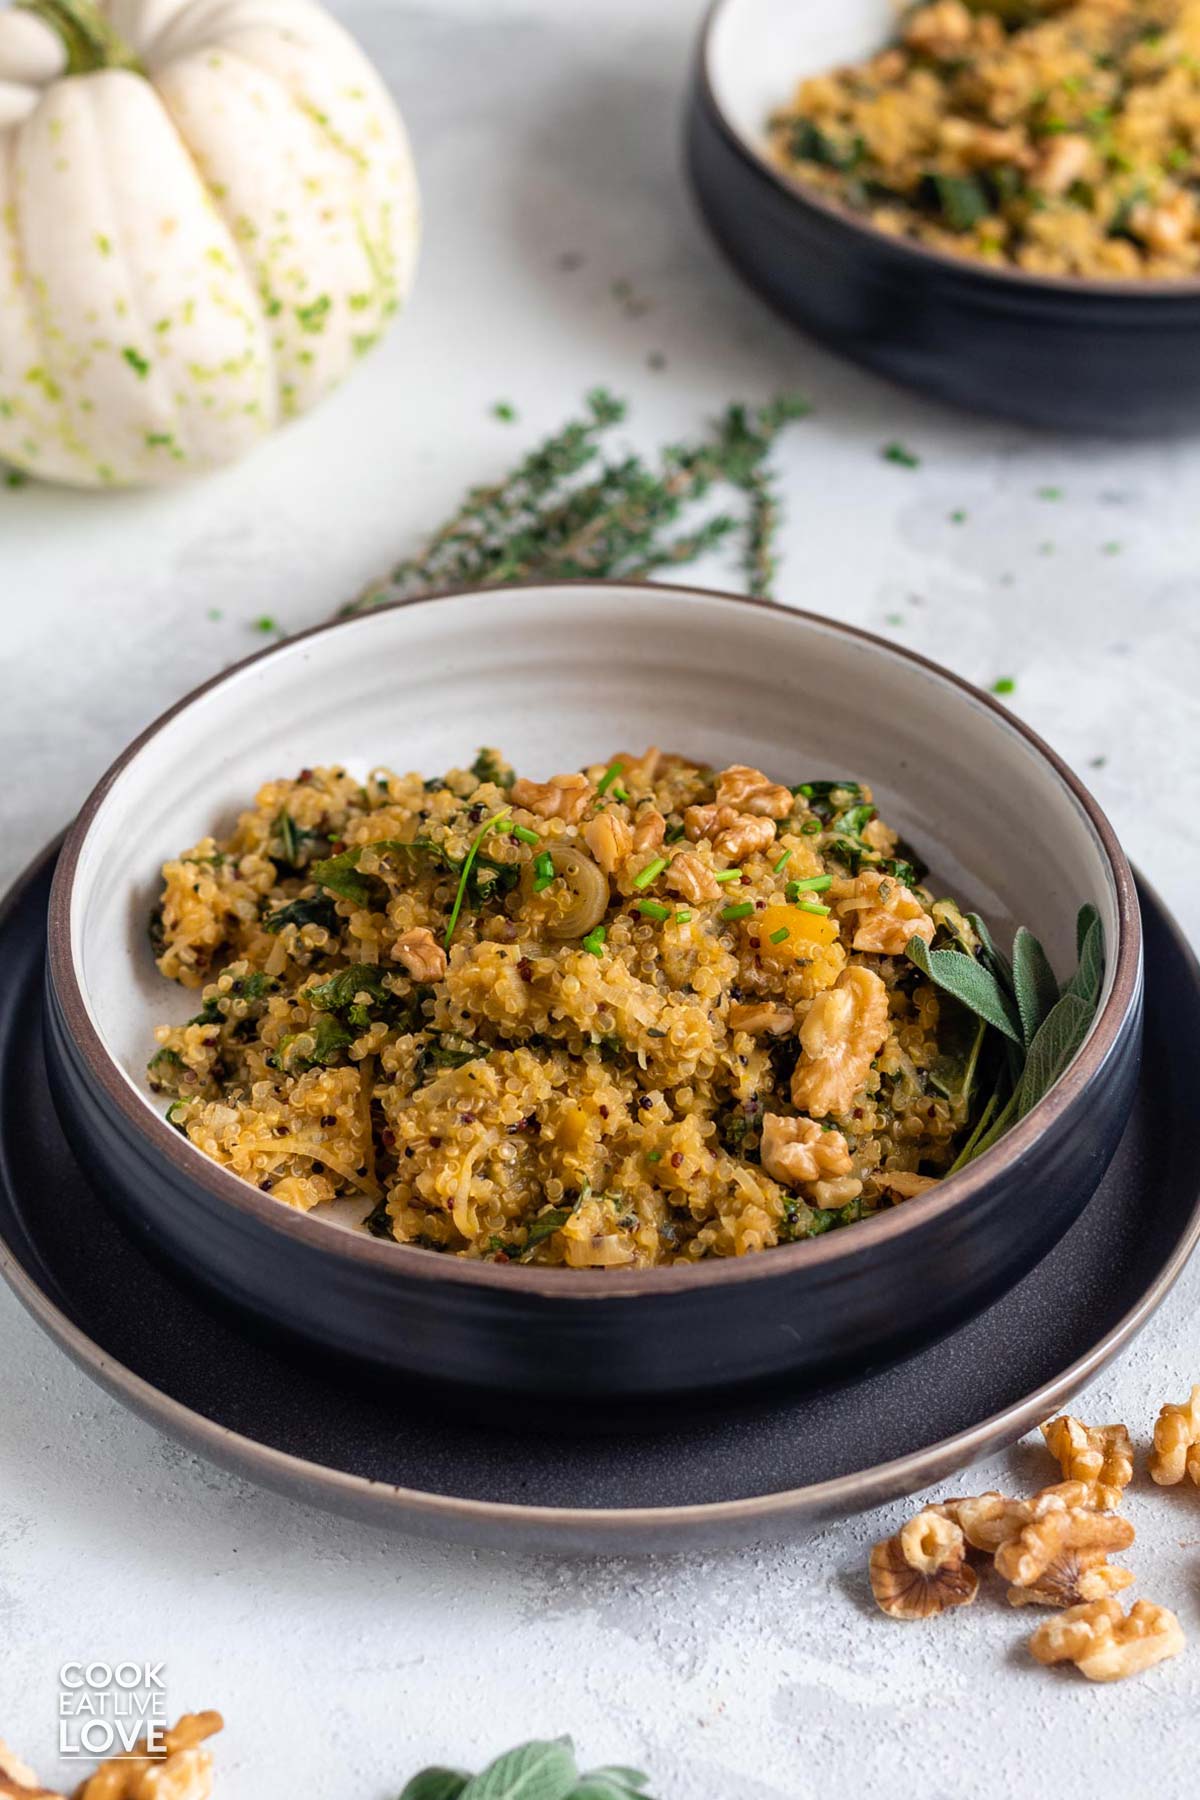 Bowl of quinoa risotto on the table with fresh herbs.